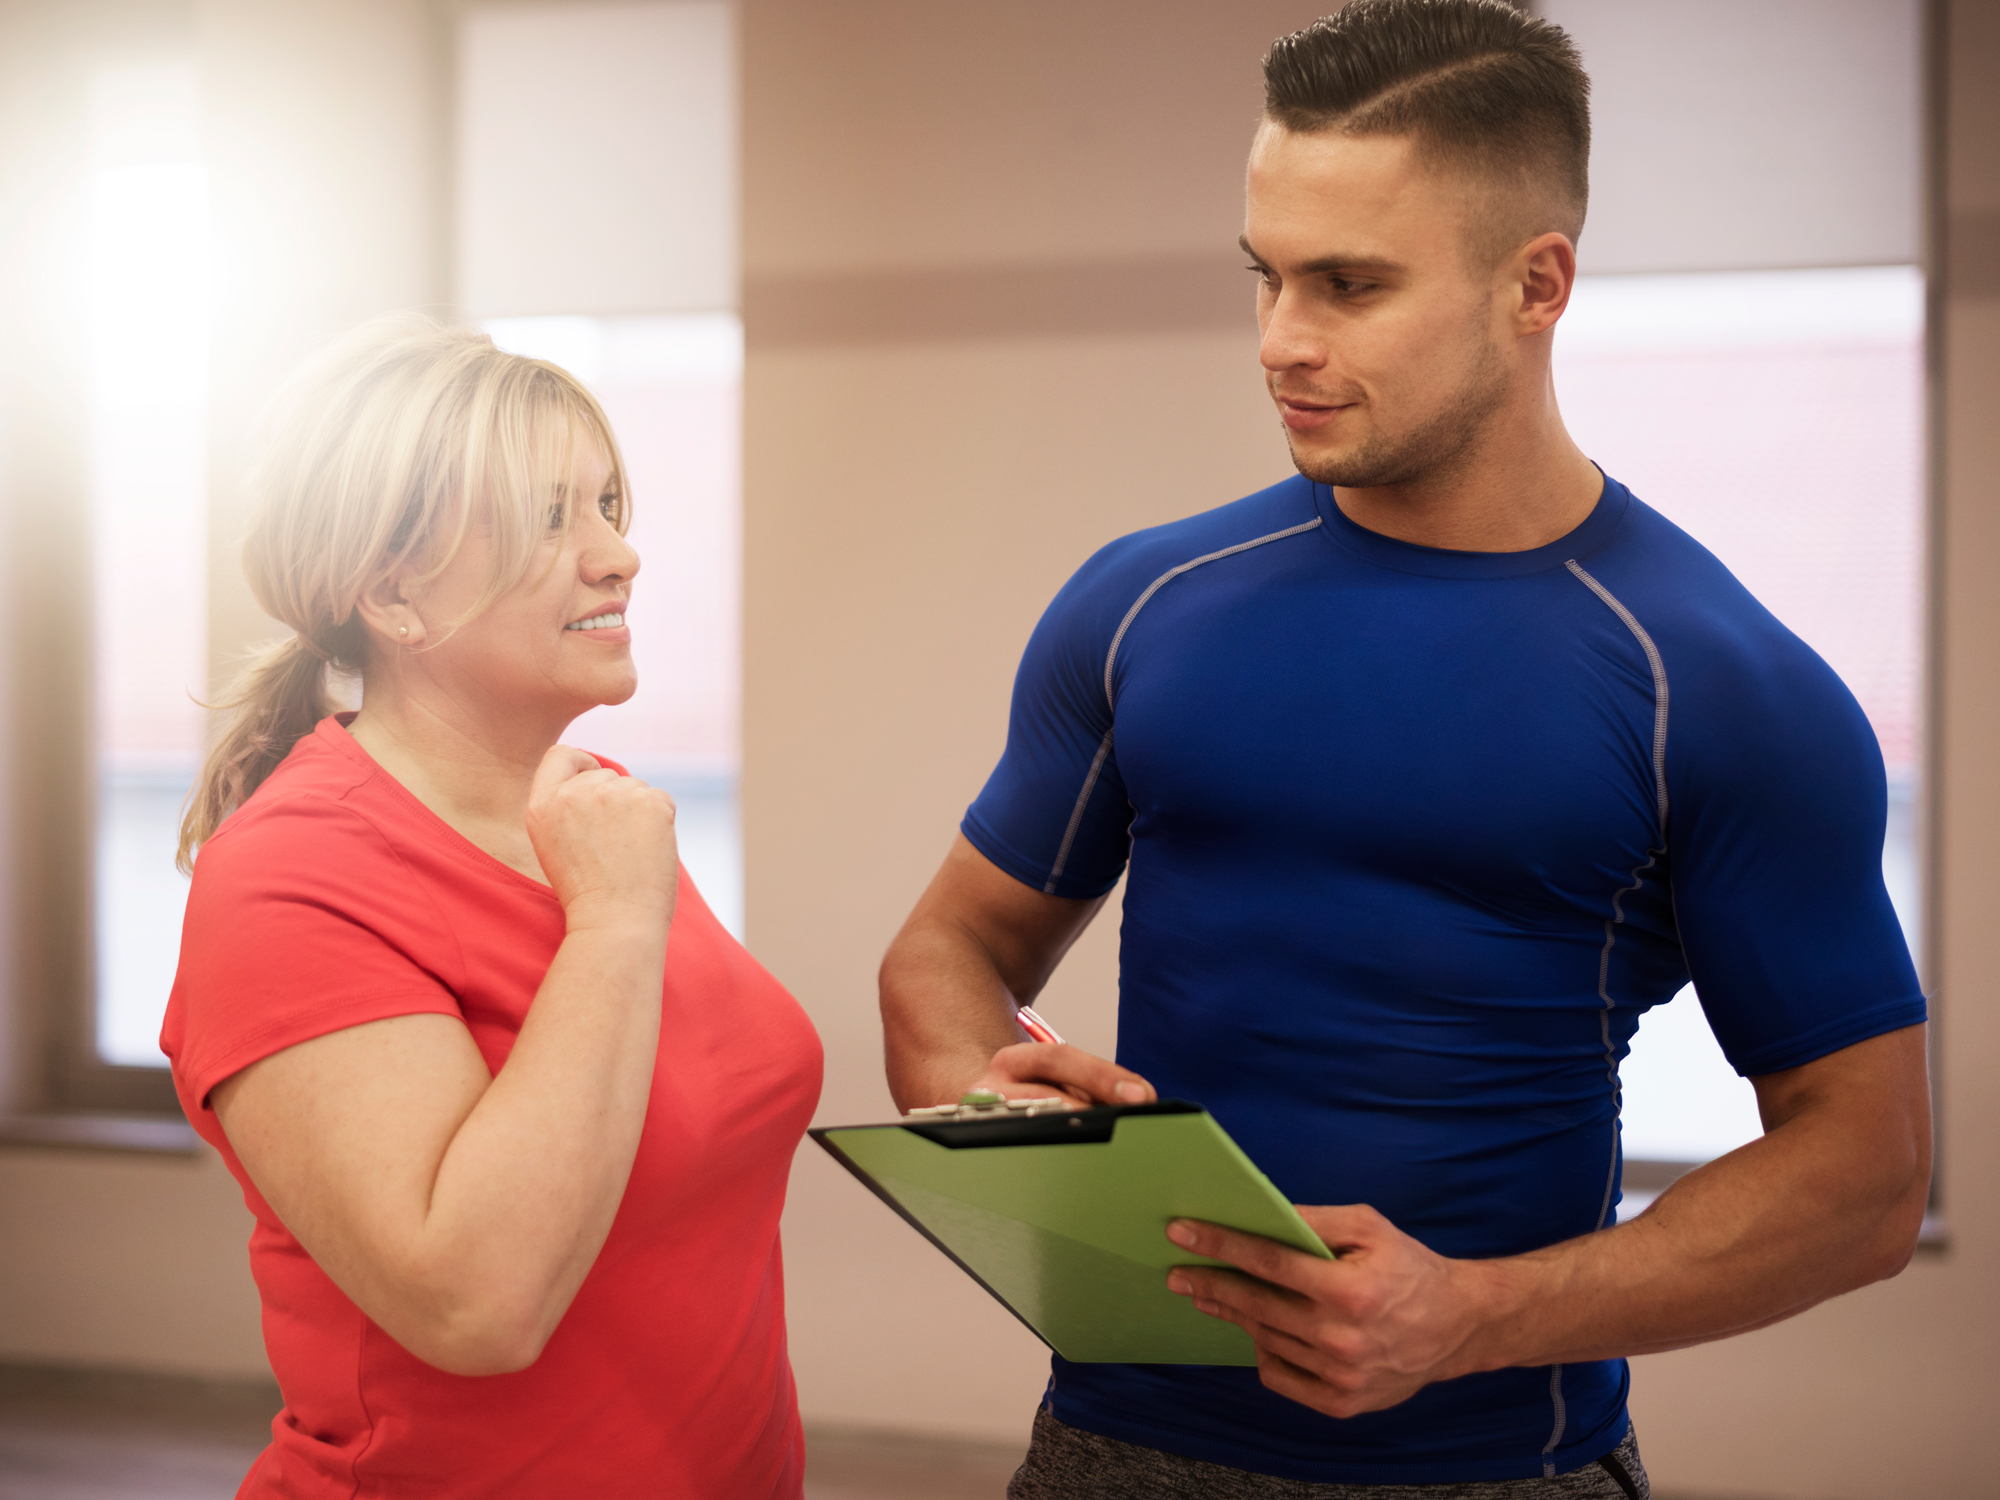 The Do’s and Dont’s of choosing a personal trainer